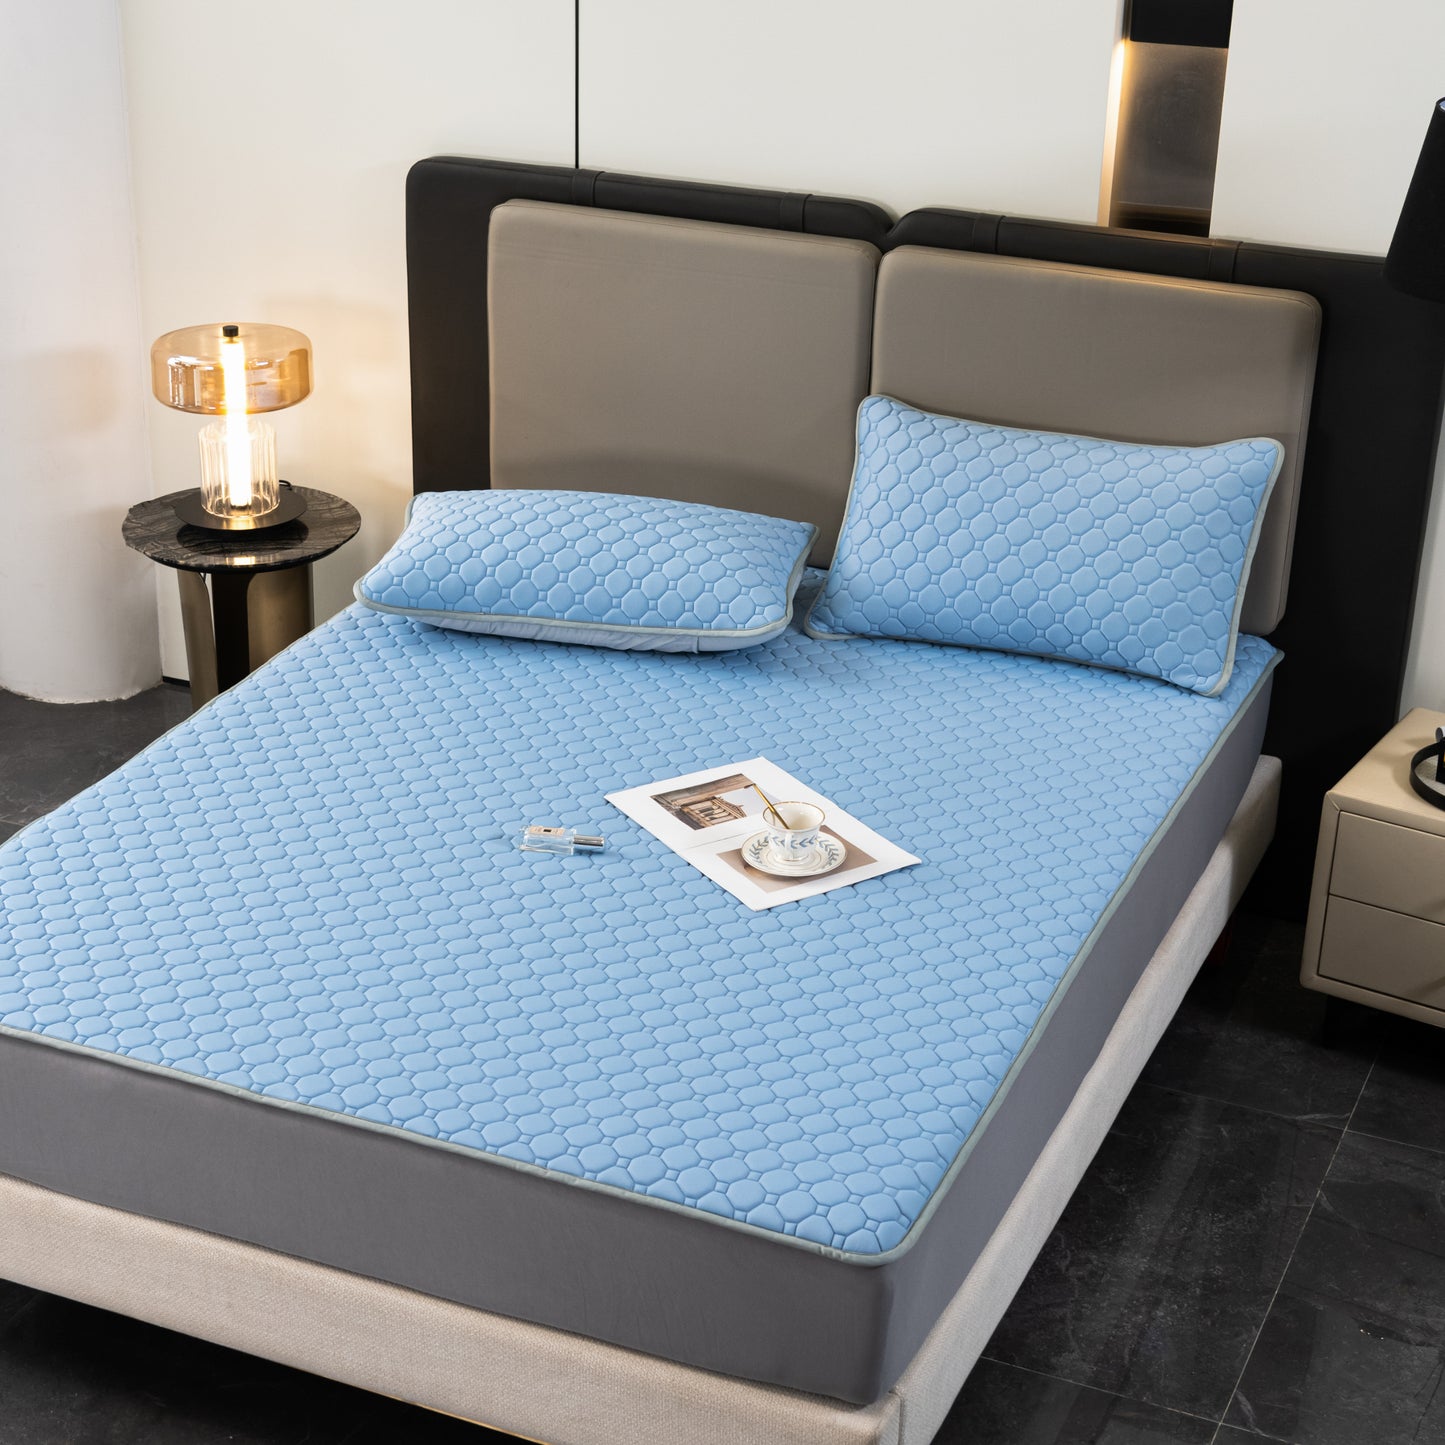 A new generation of cold master, cold silicone mat series， Waterproof Quilted Deep Pocket Mattress Cover - Soft Comfort, Easy Care, Bedroom and Guest Room Essential.